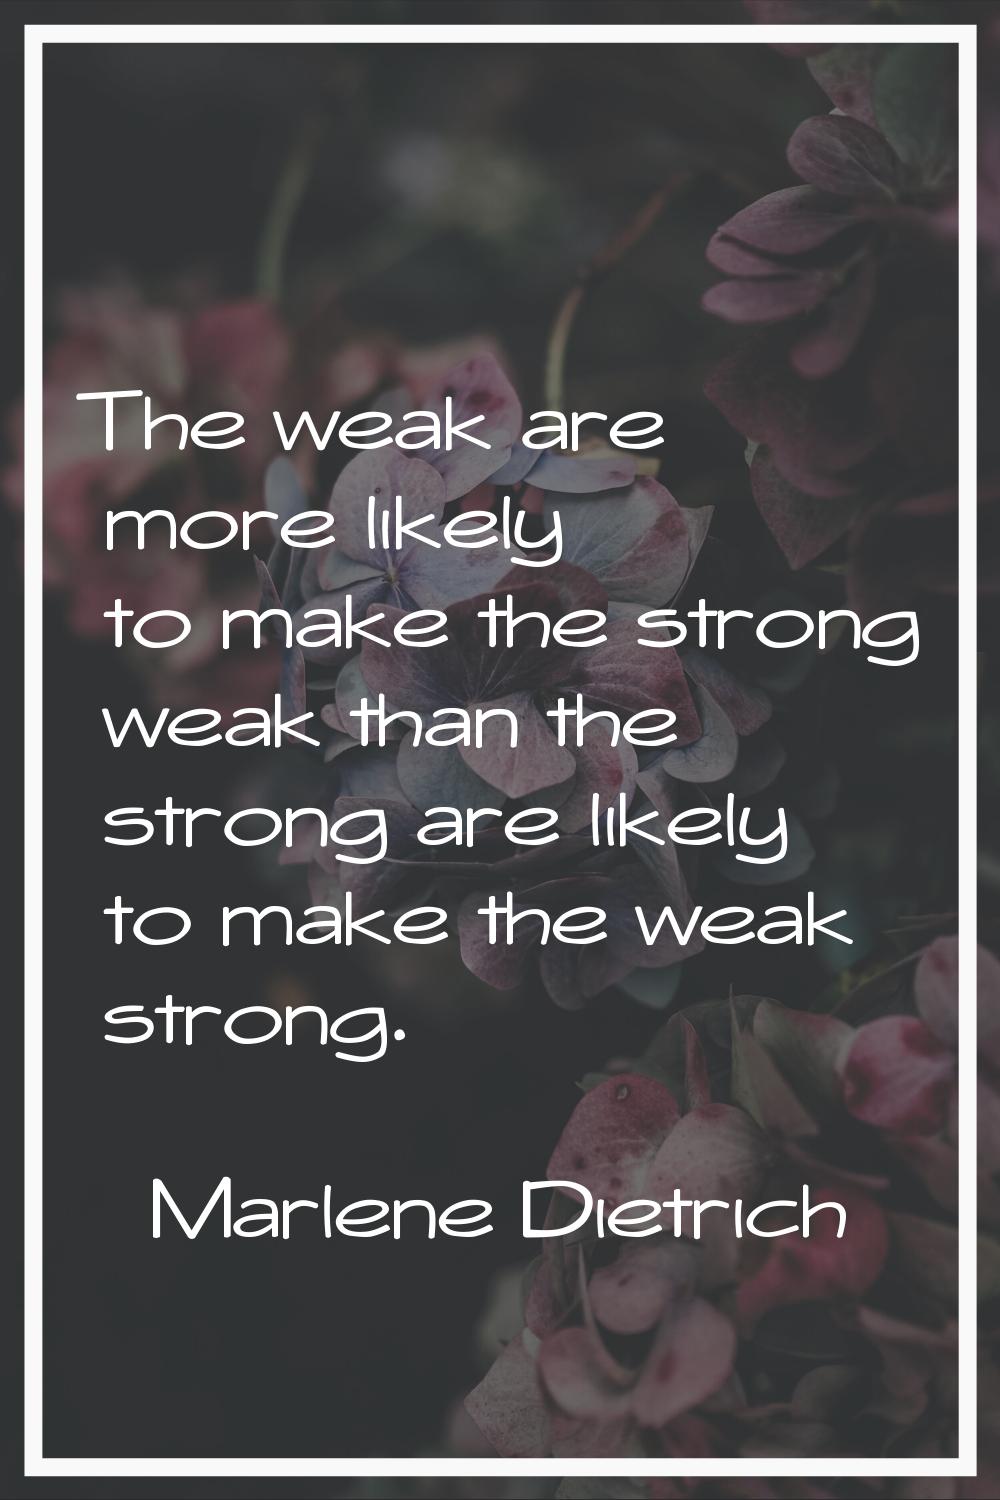 The weak are more likely to make the strong weak than the strong are likely to make the weak strong